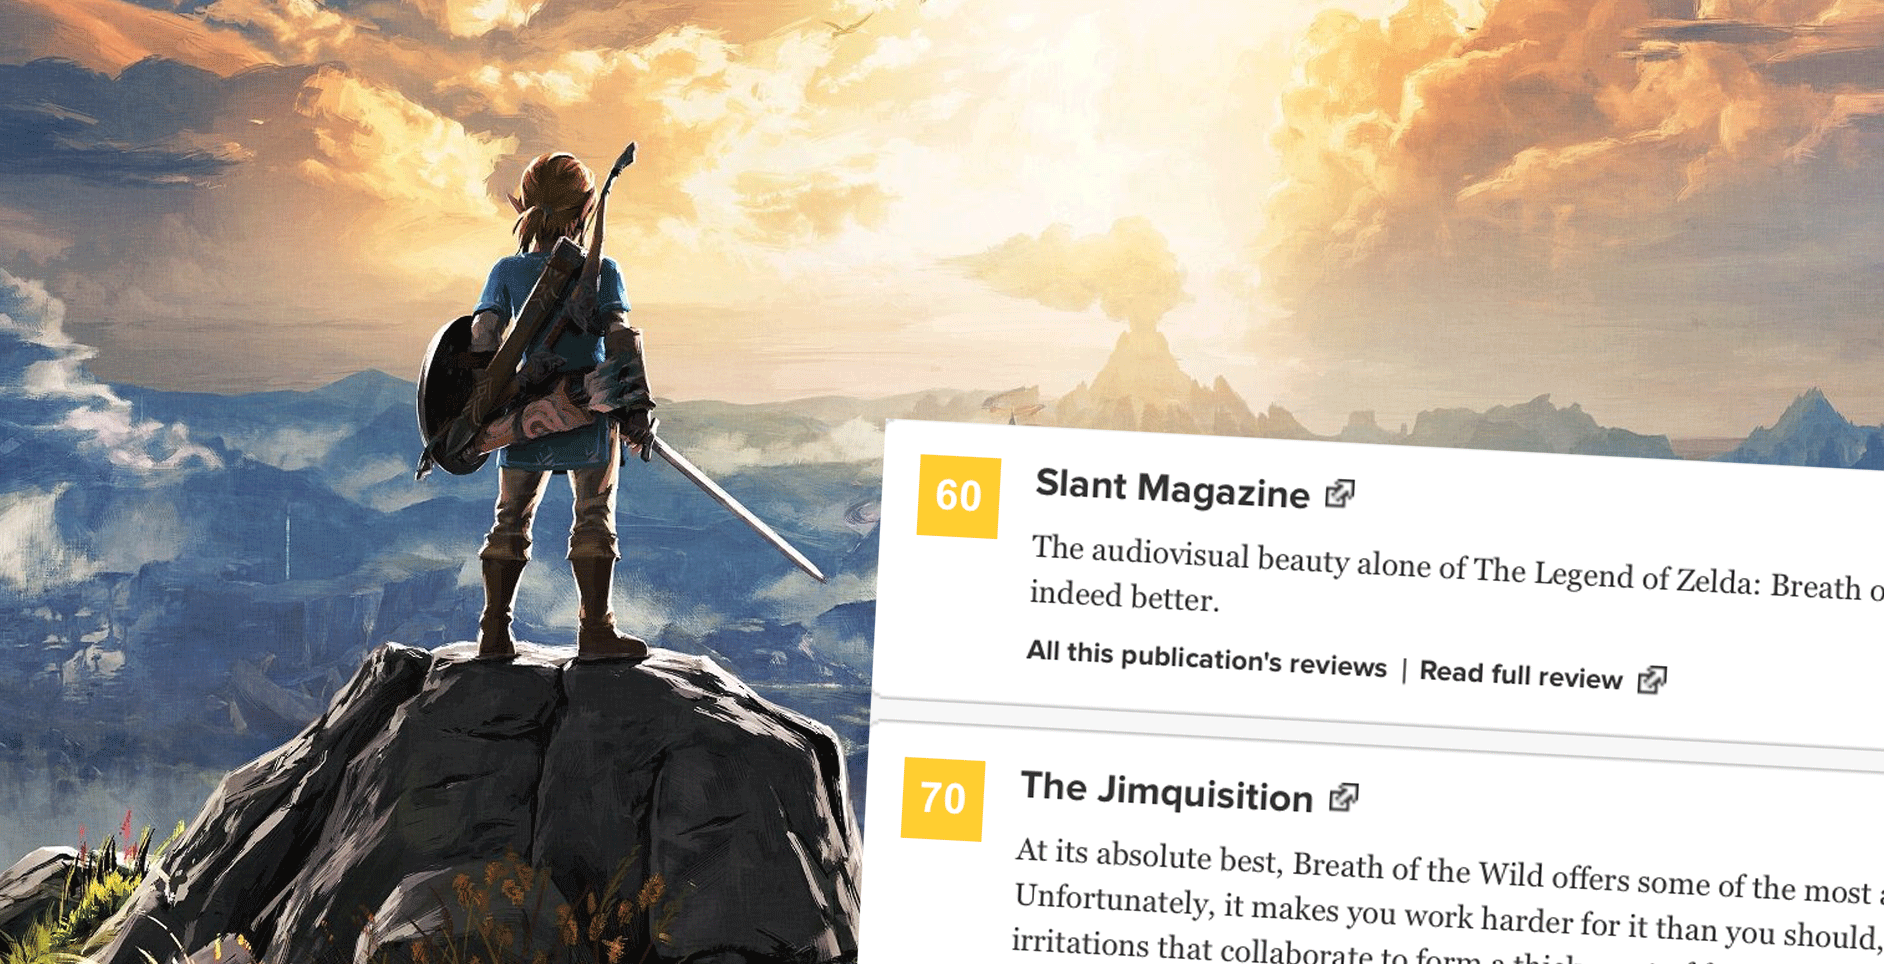 New Zelda hits #4 on Metacritic's best games of all time